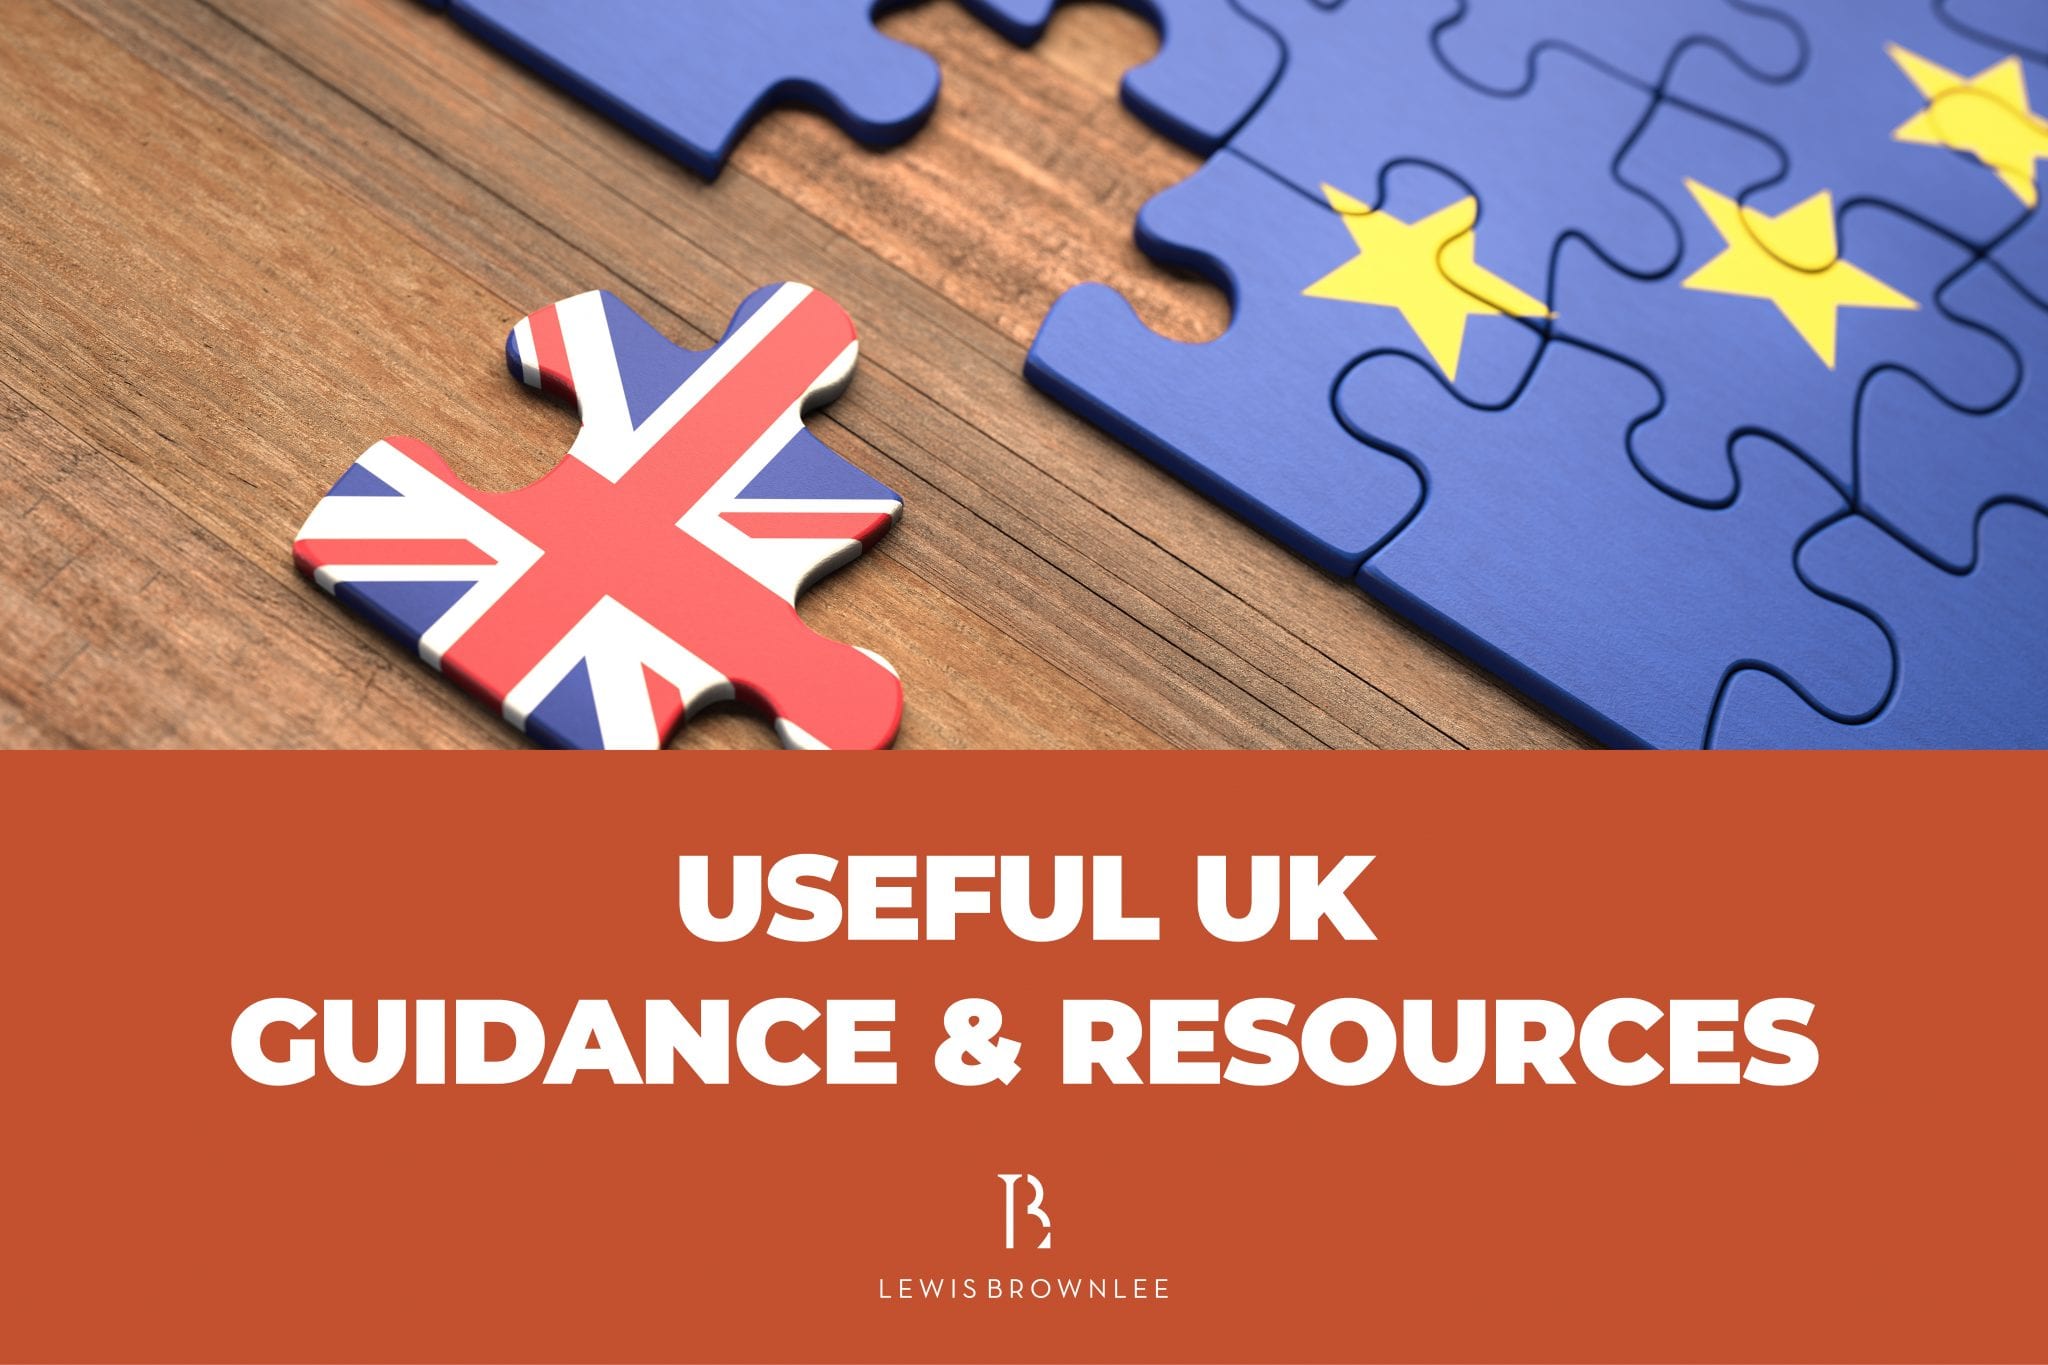 USEFUL UK GUIDANCE AND RESOURCES